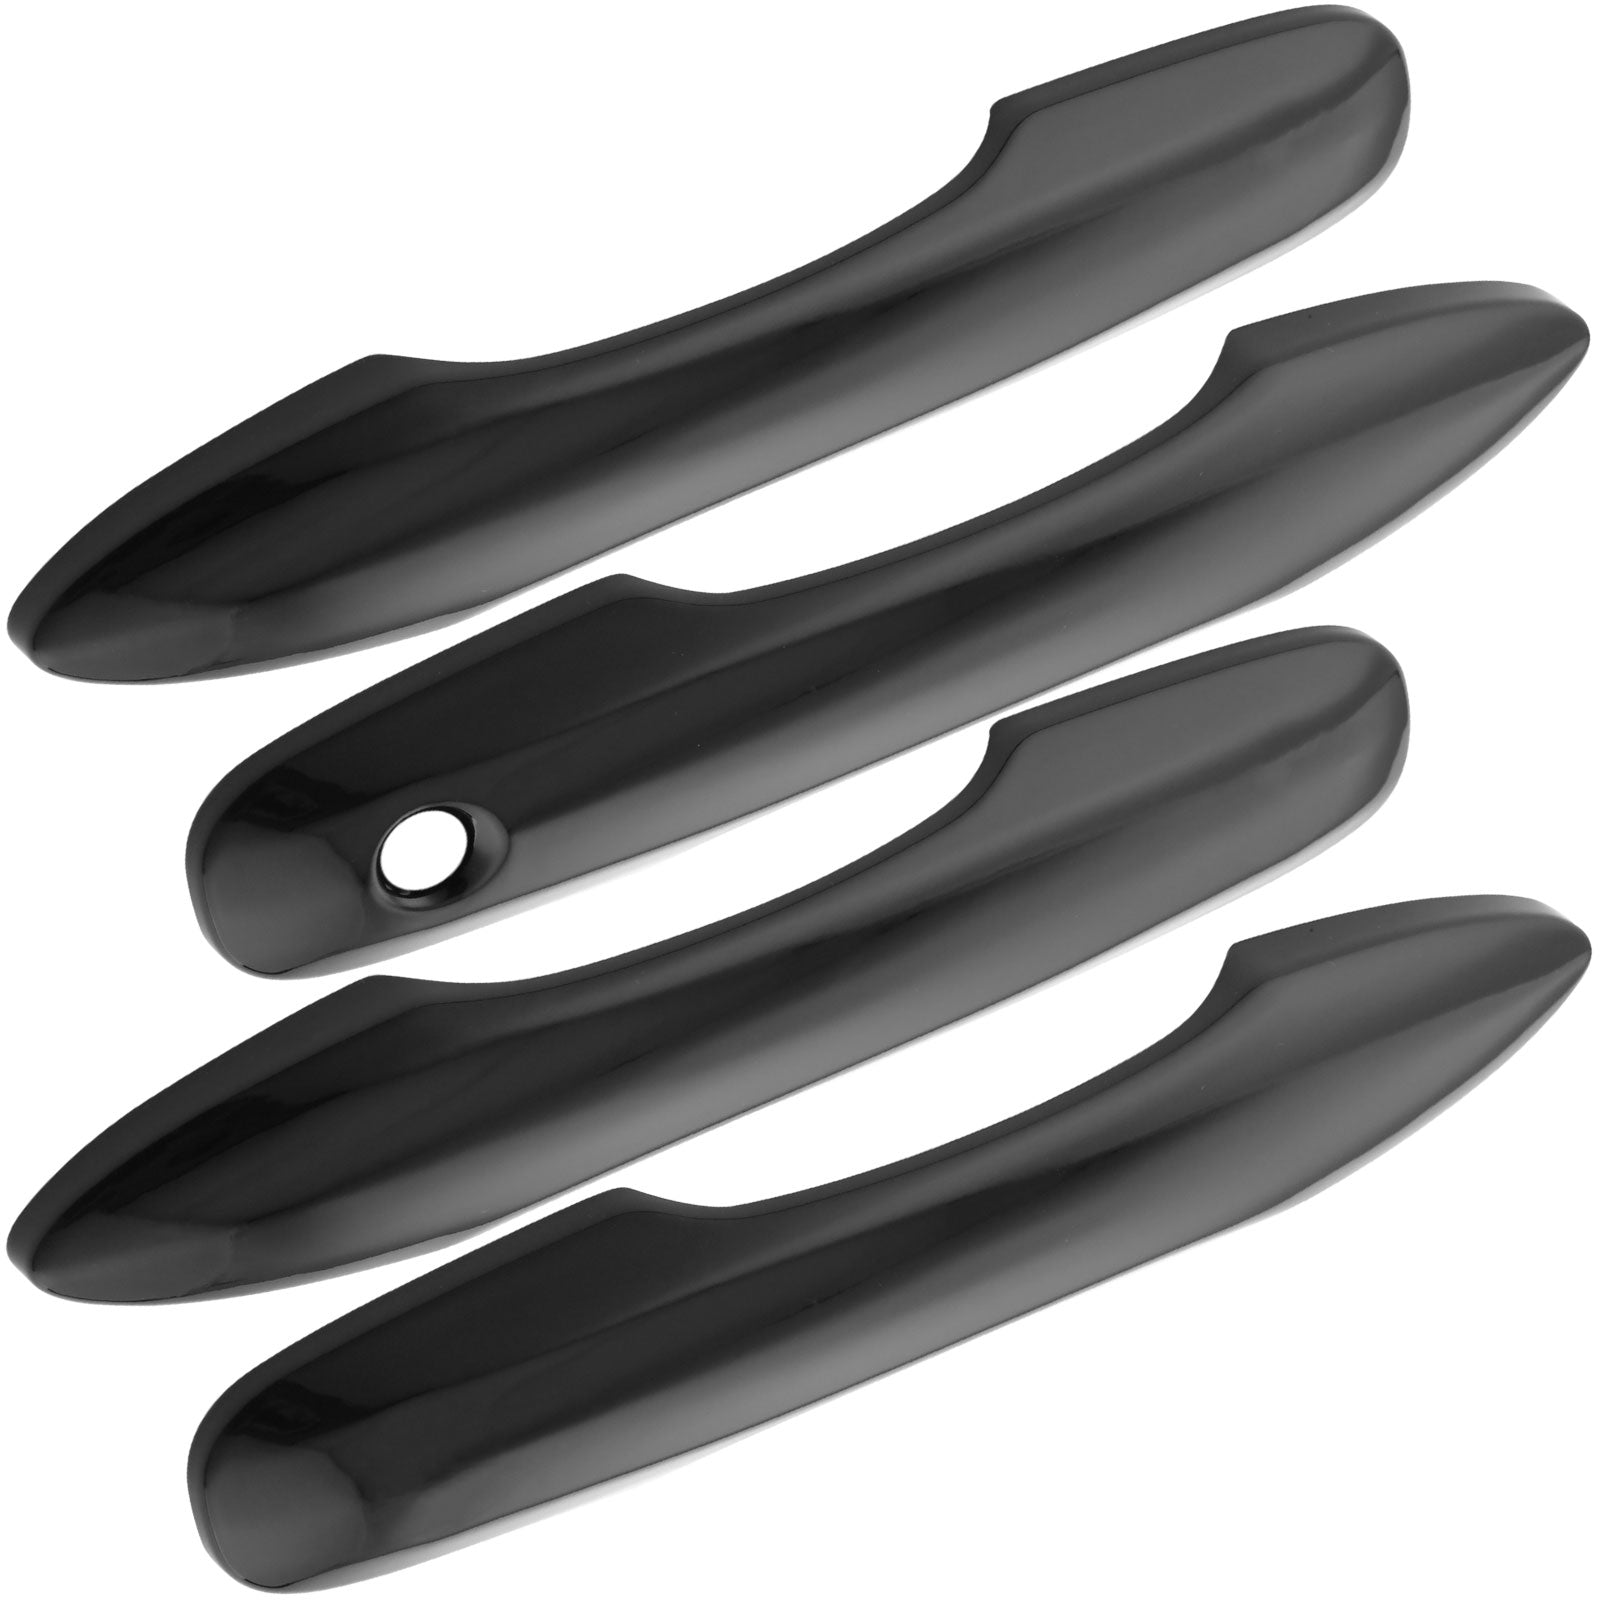 4Pcs Glossy Black Door Handle Covers W/O Keyhole Fits for Toyota Camry Corolla Prius Prime Car Door Handle MotorbyMotor